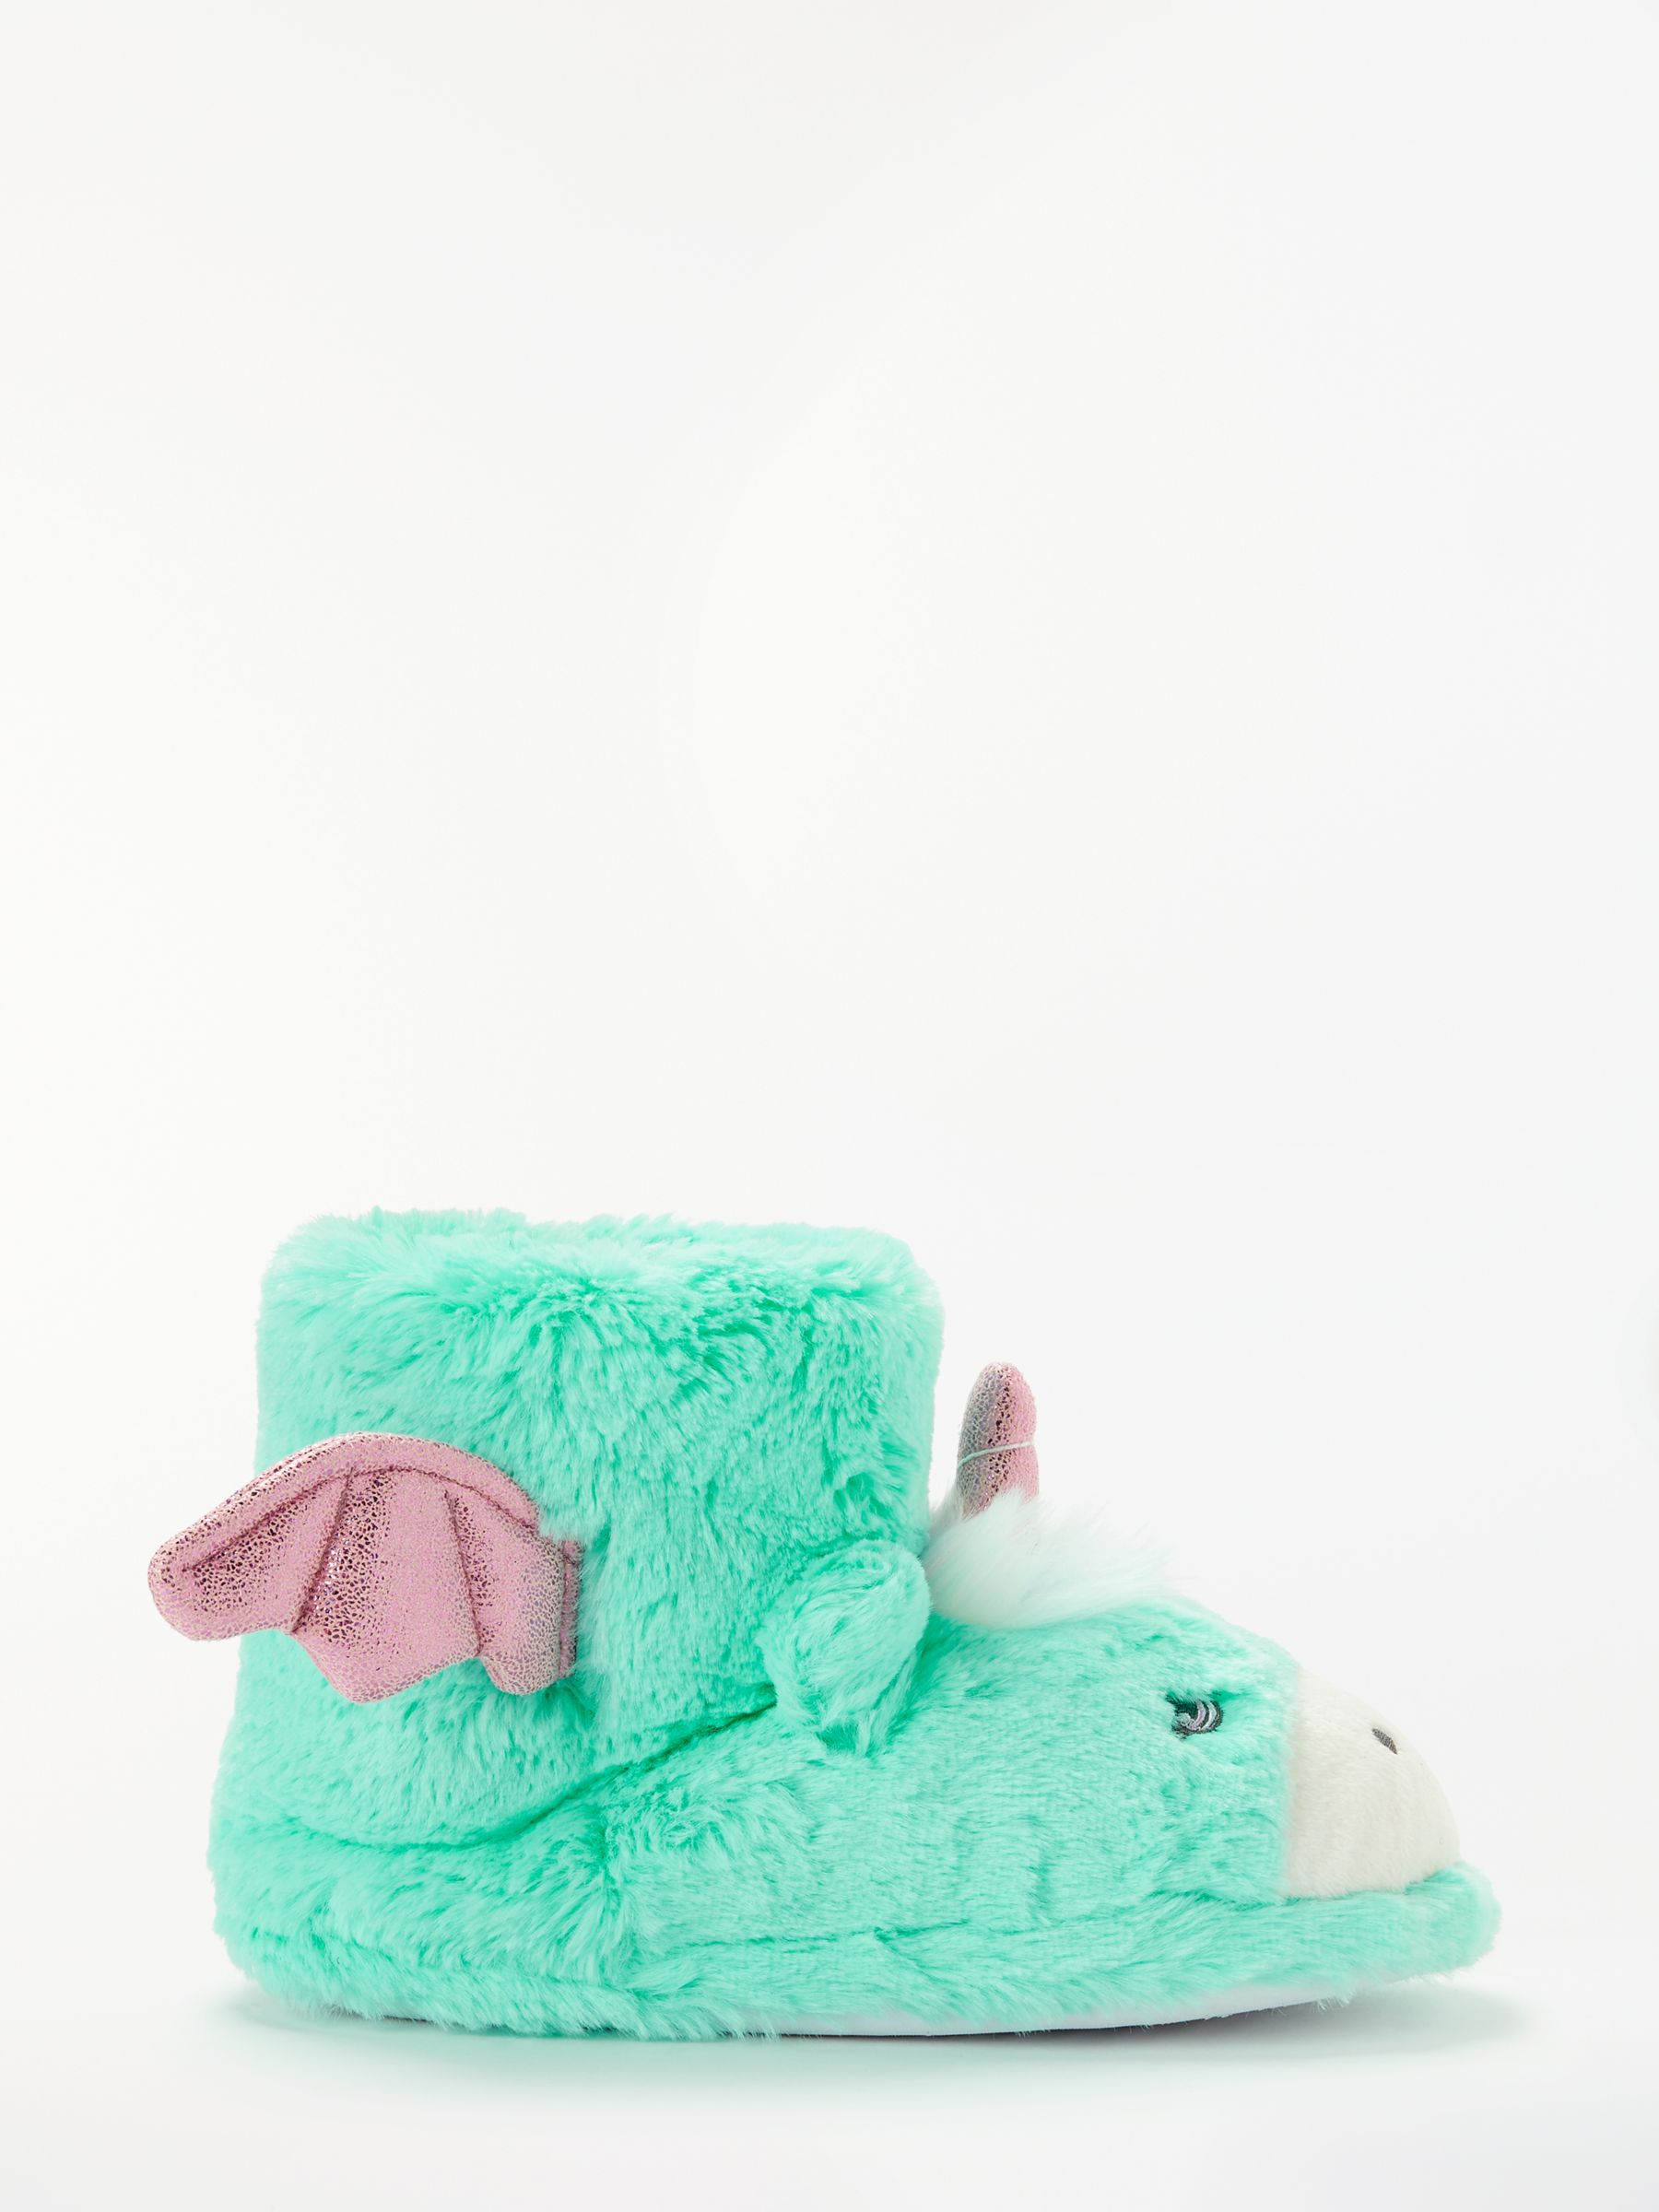 turquoise slippers